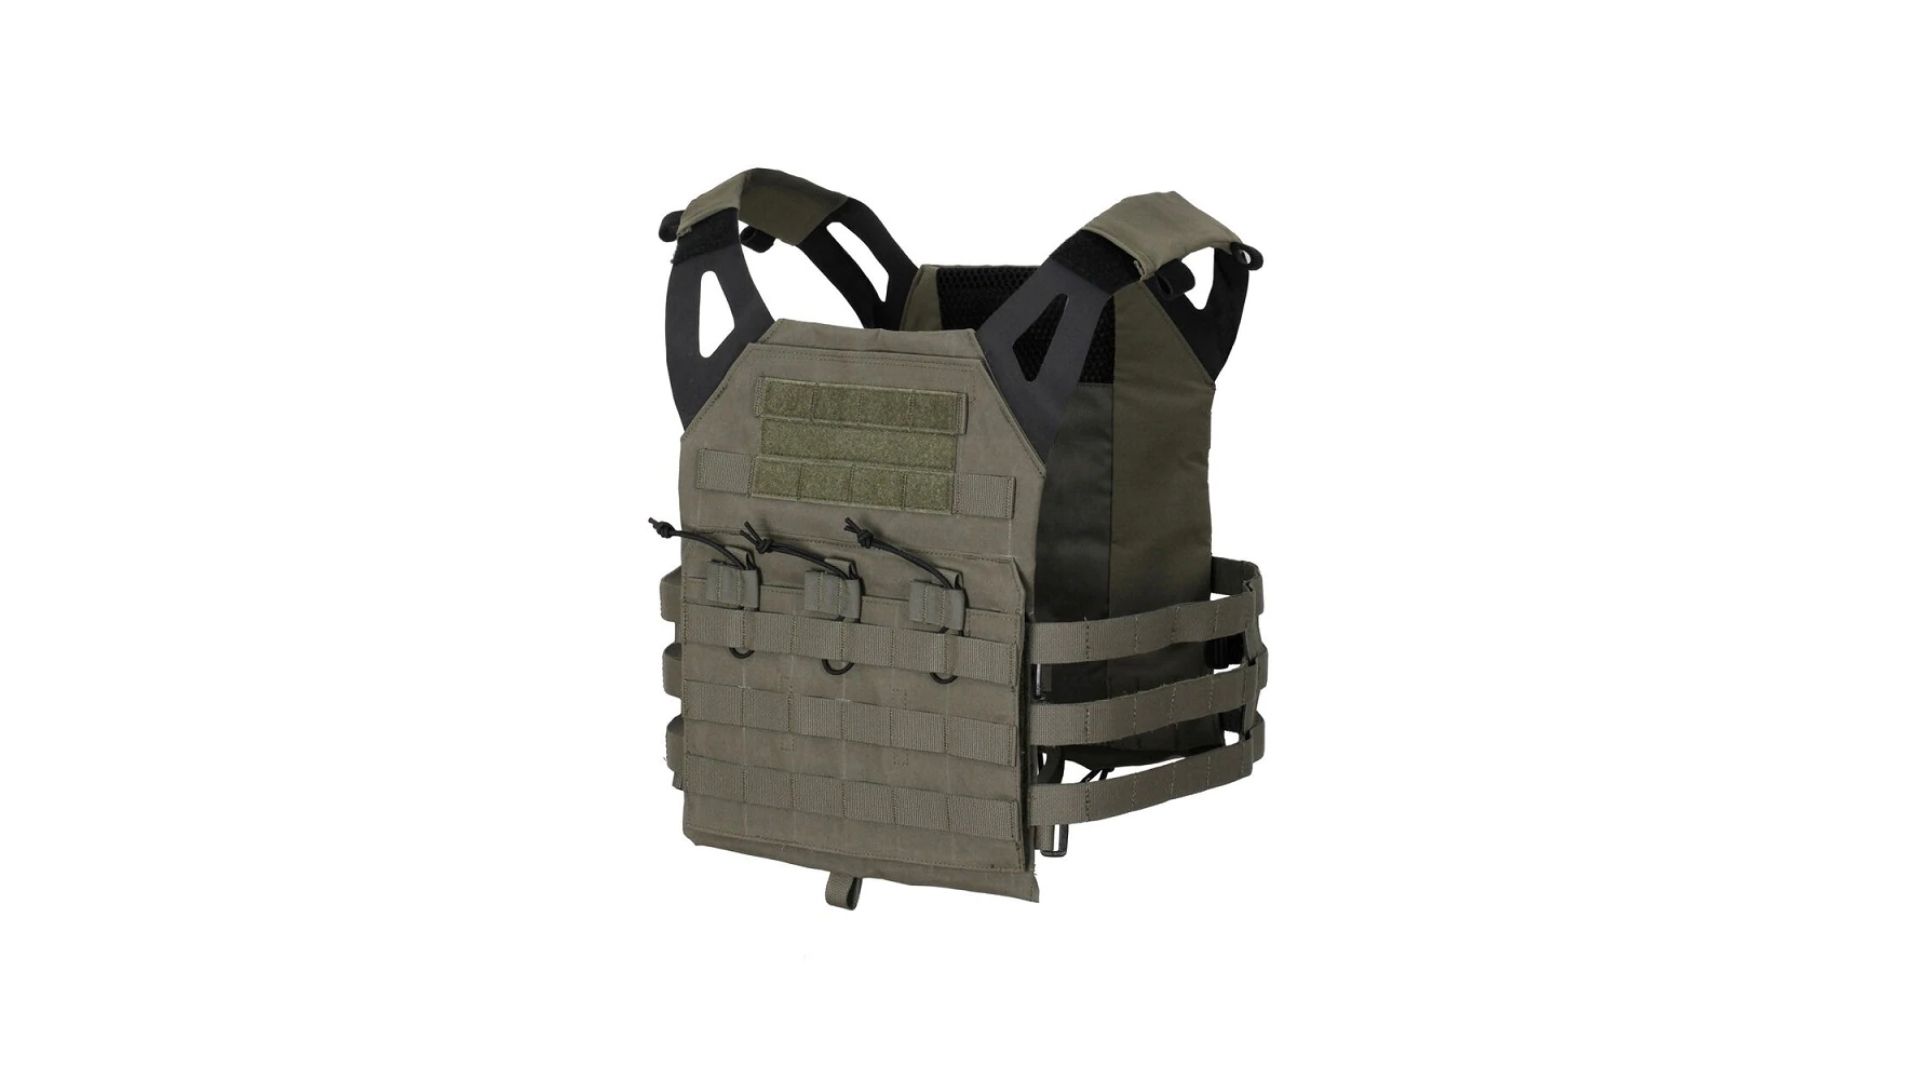 Best Plate Carriers (Review & Buying Guide) in 2023 - Task & Purpose